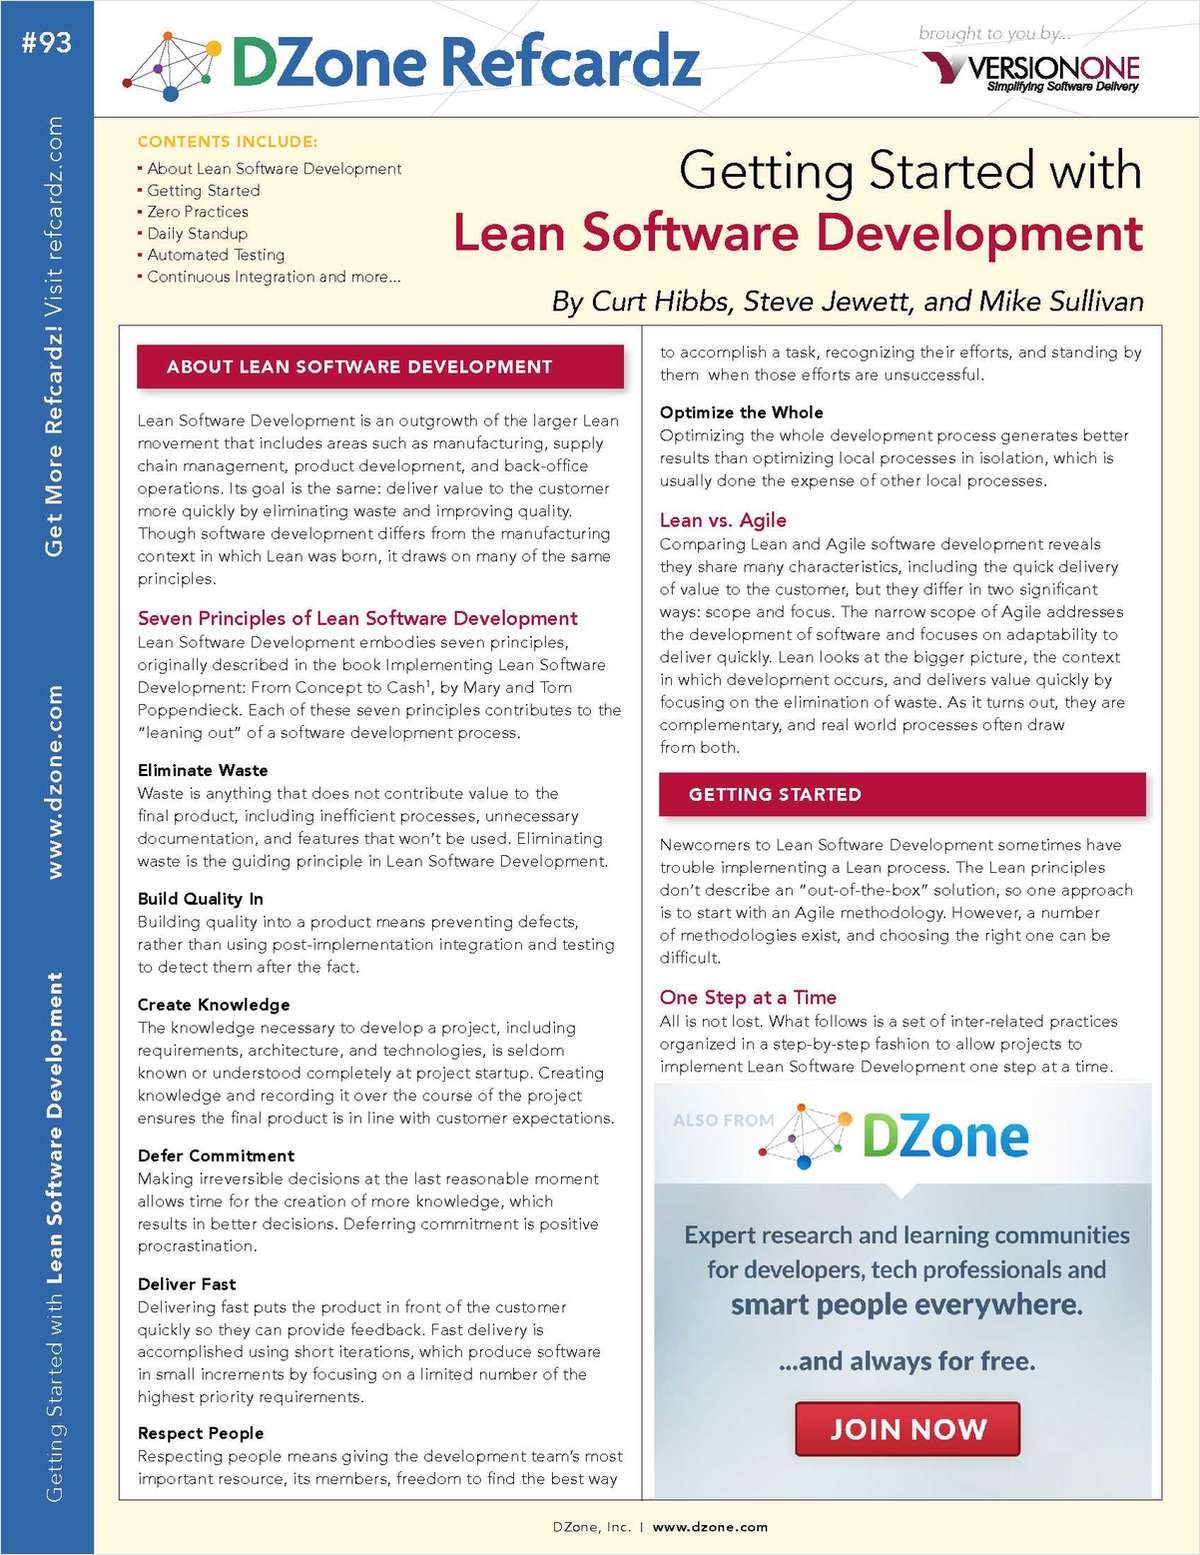 Getting Started with Lean Software Development